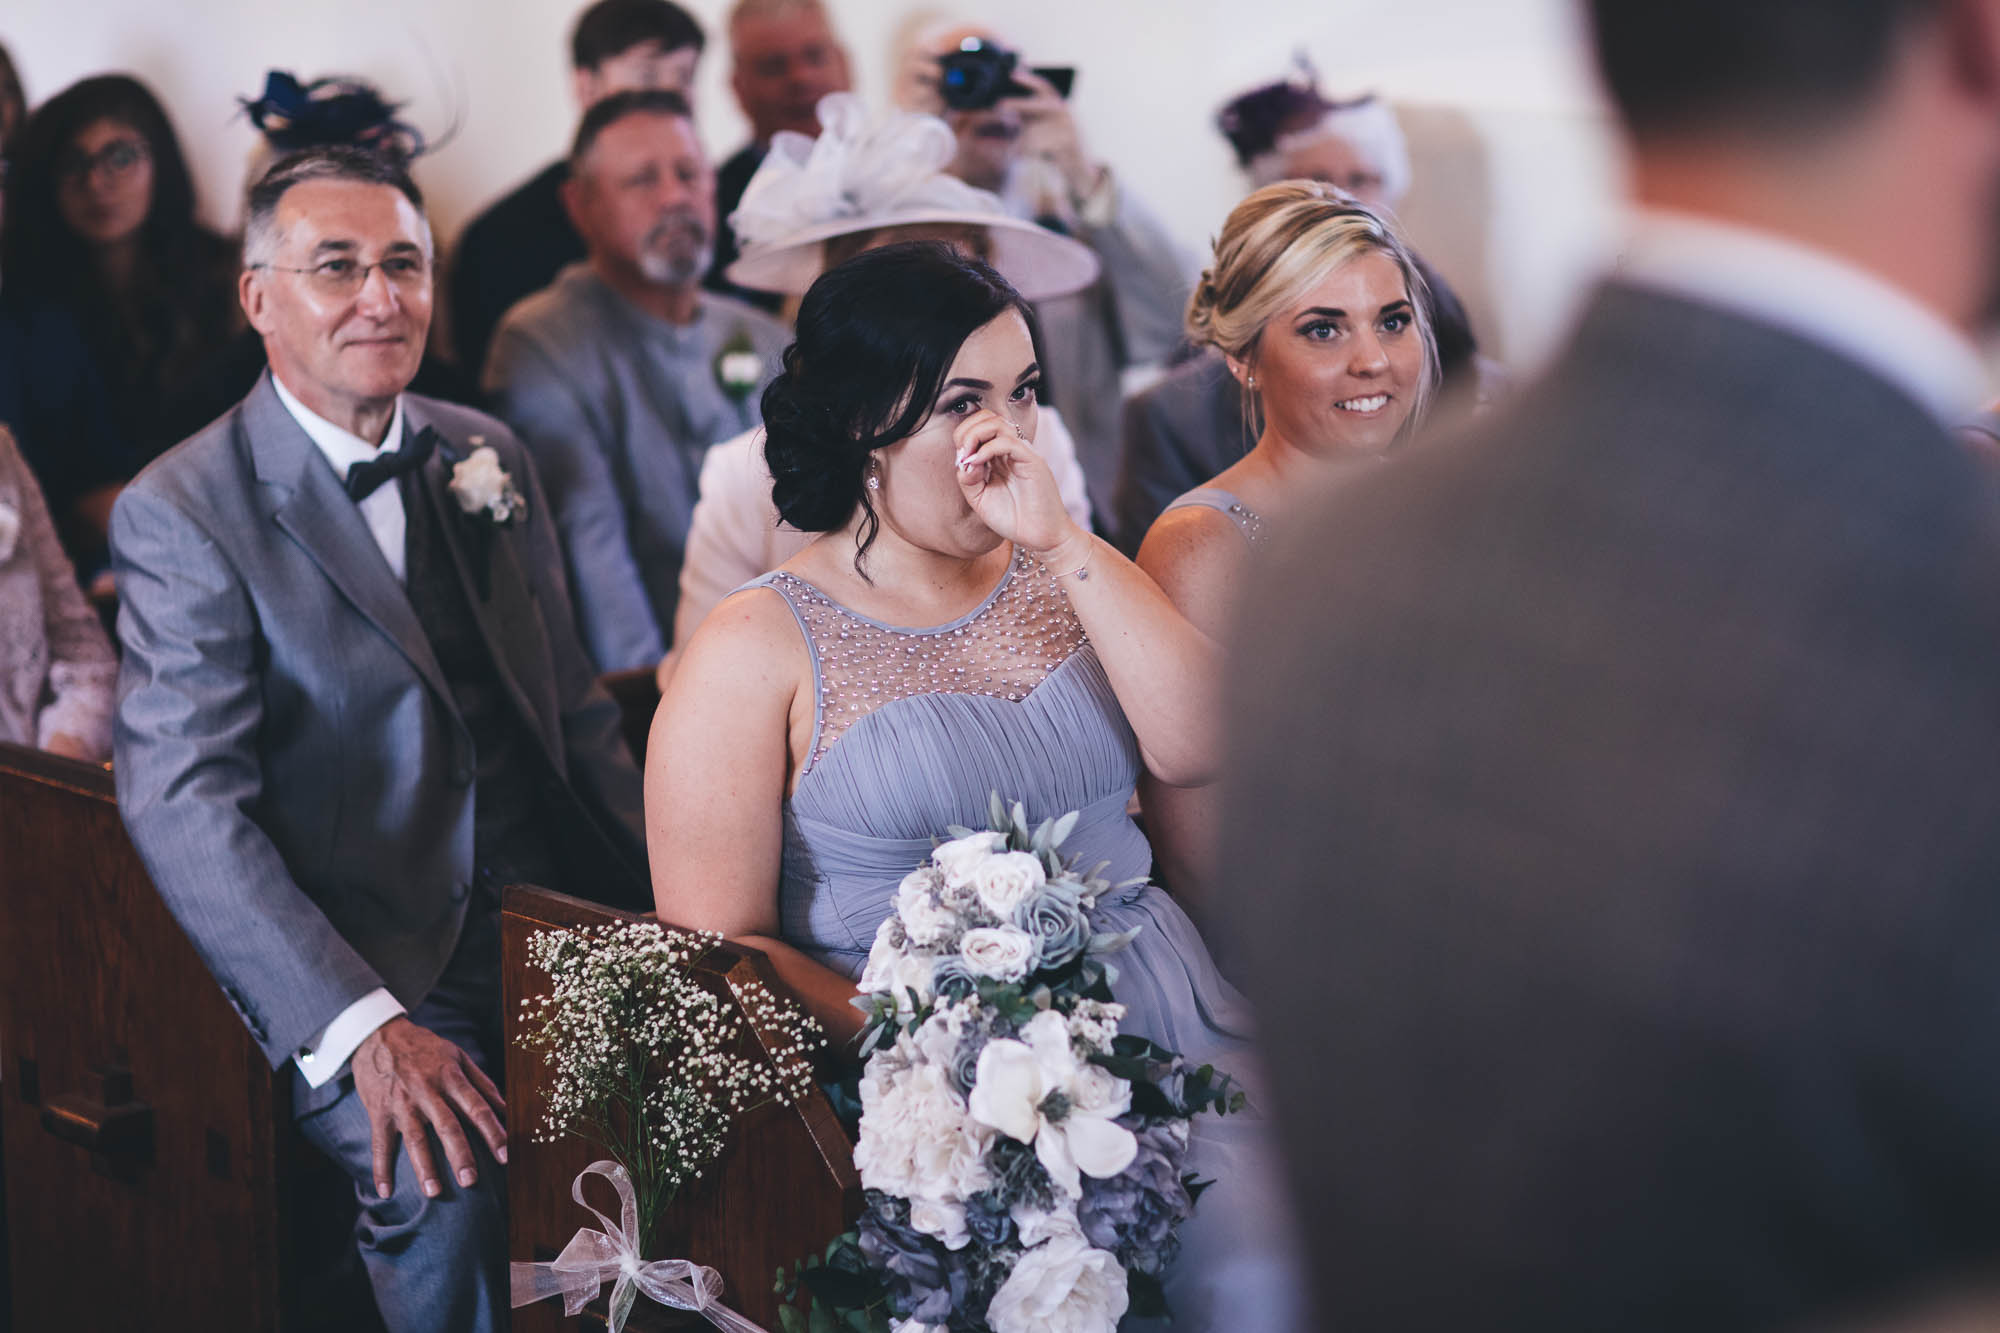 Bridesmaid wipes away a tear as she and other wedding guests watch the wedding ceremony